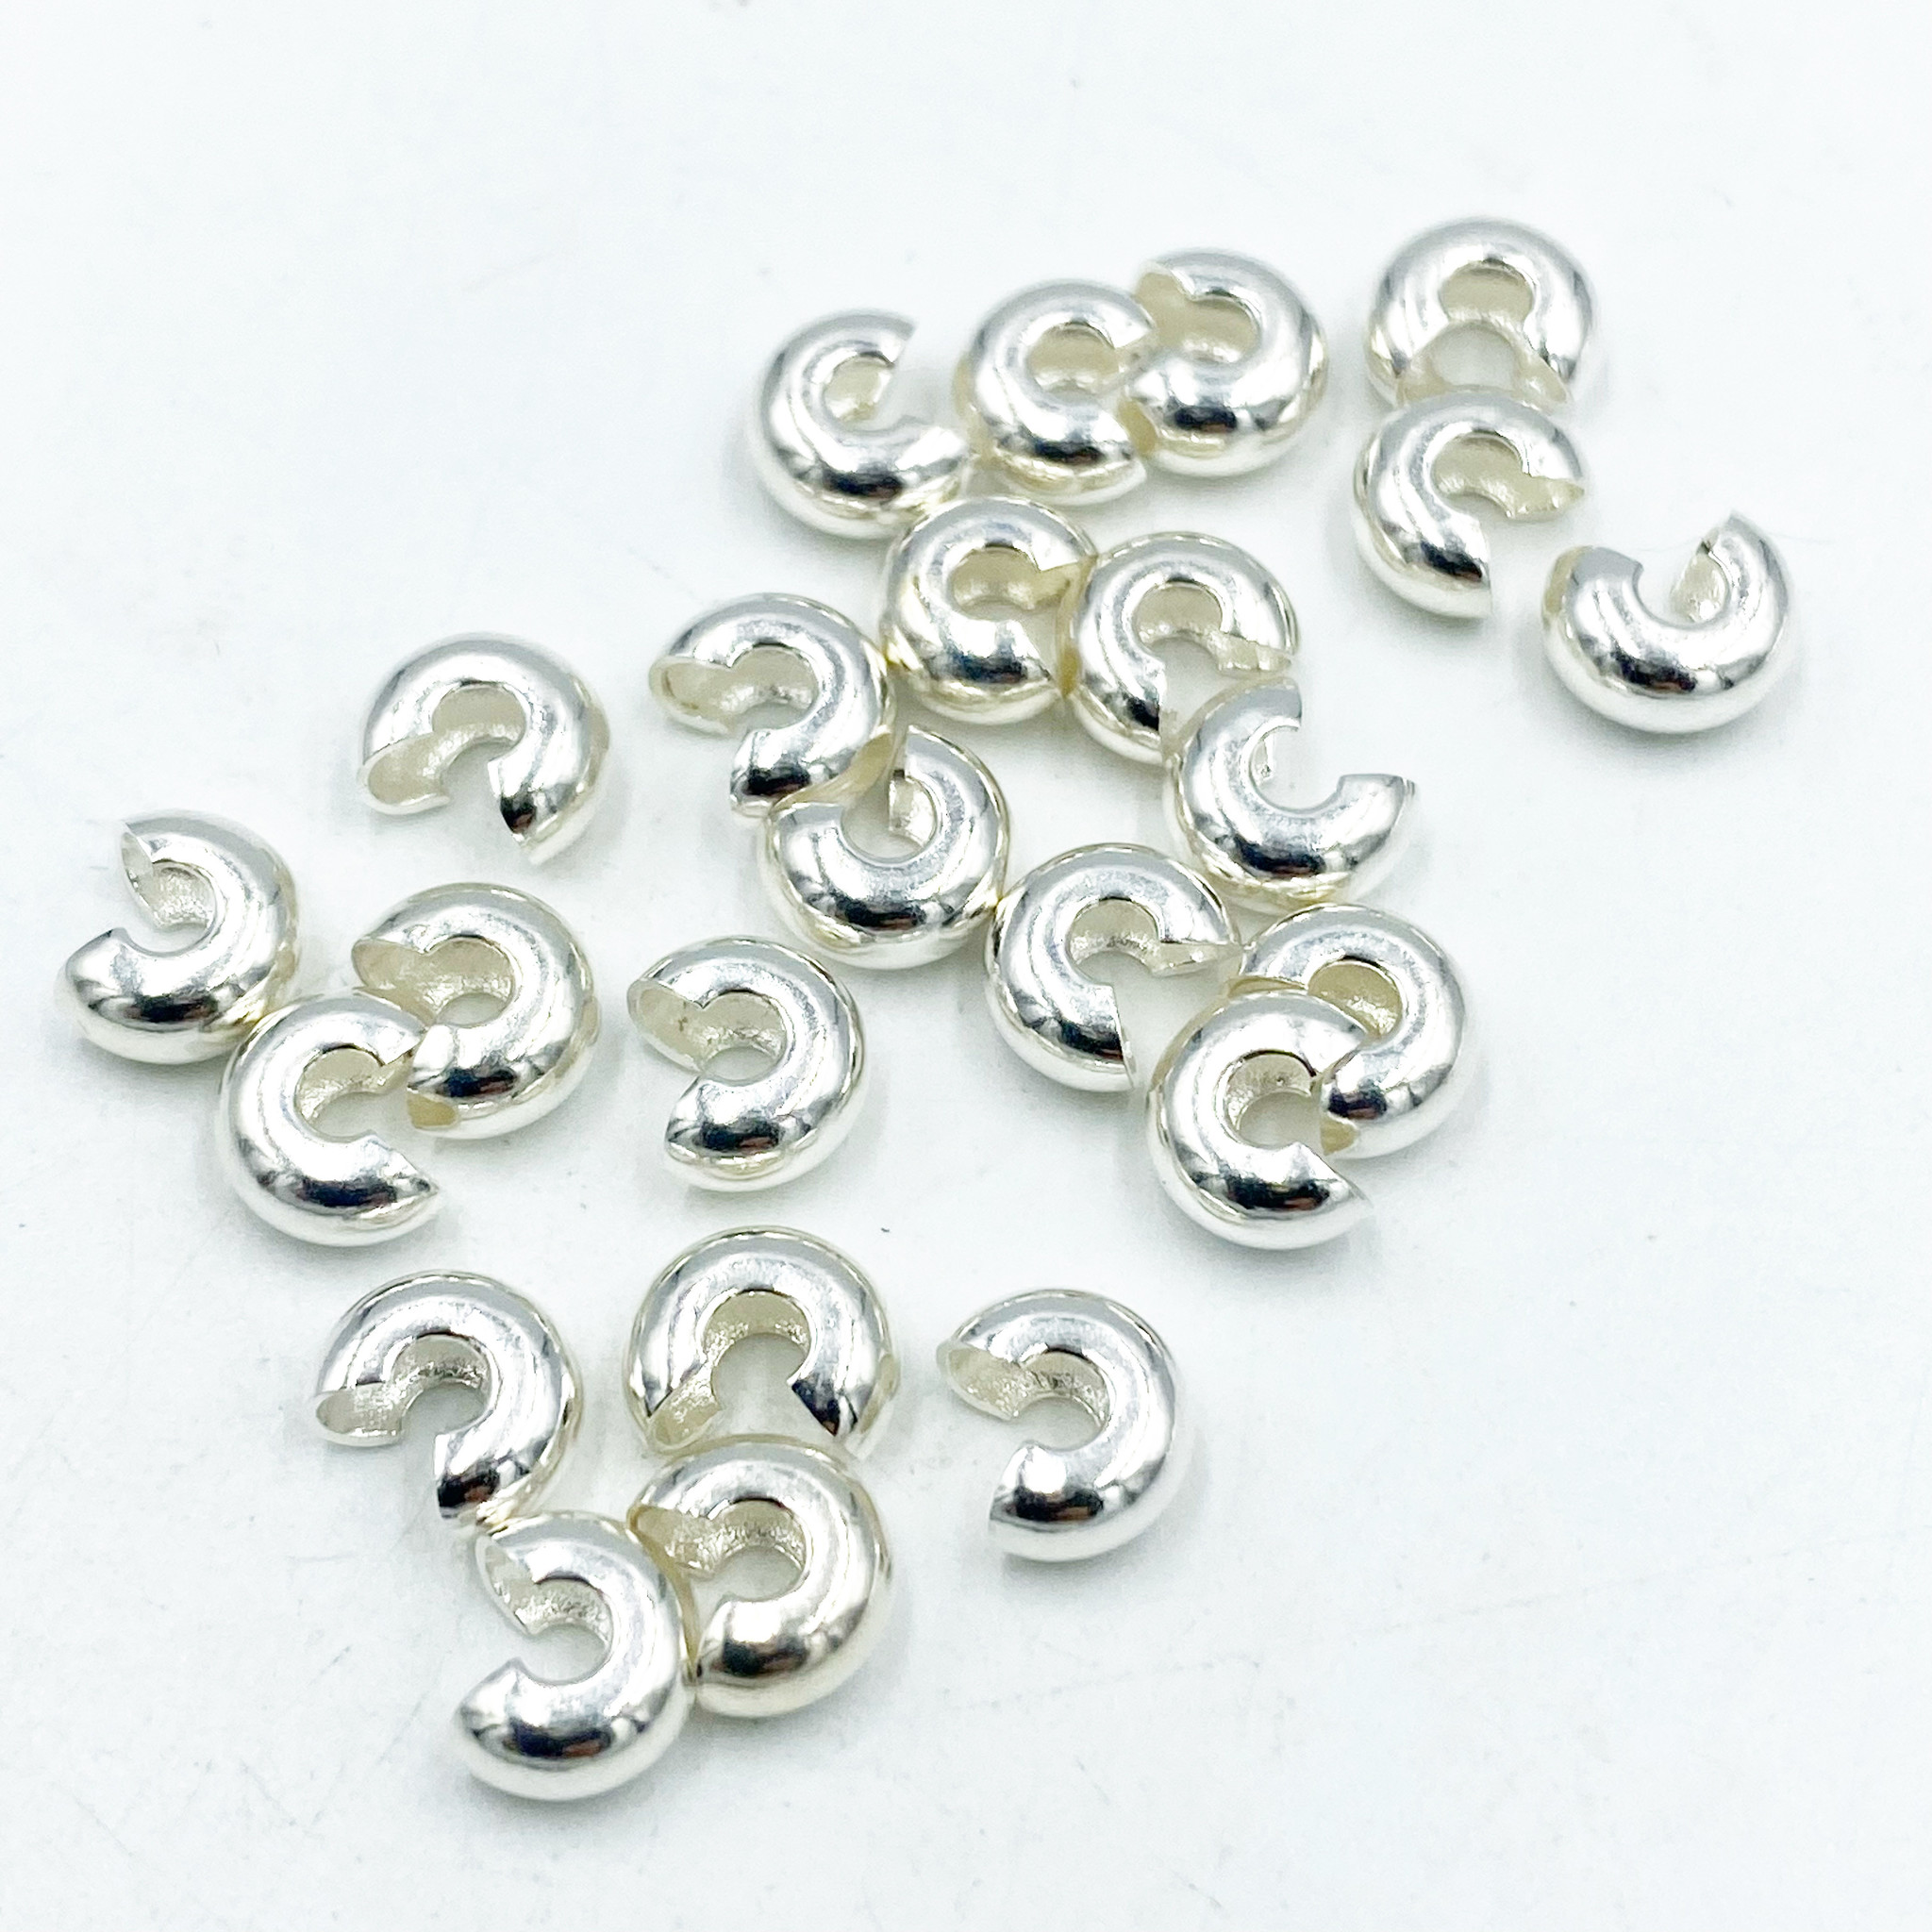 5MM CRIMP COVER: SILVER PLATED- 24/PC - Capital City Beads